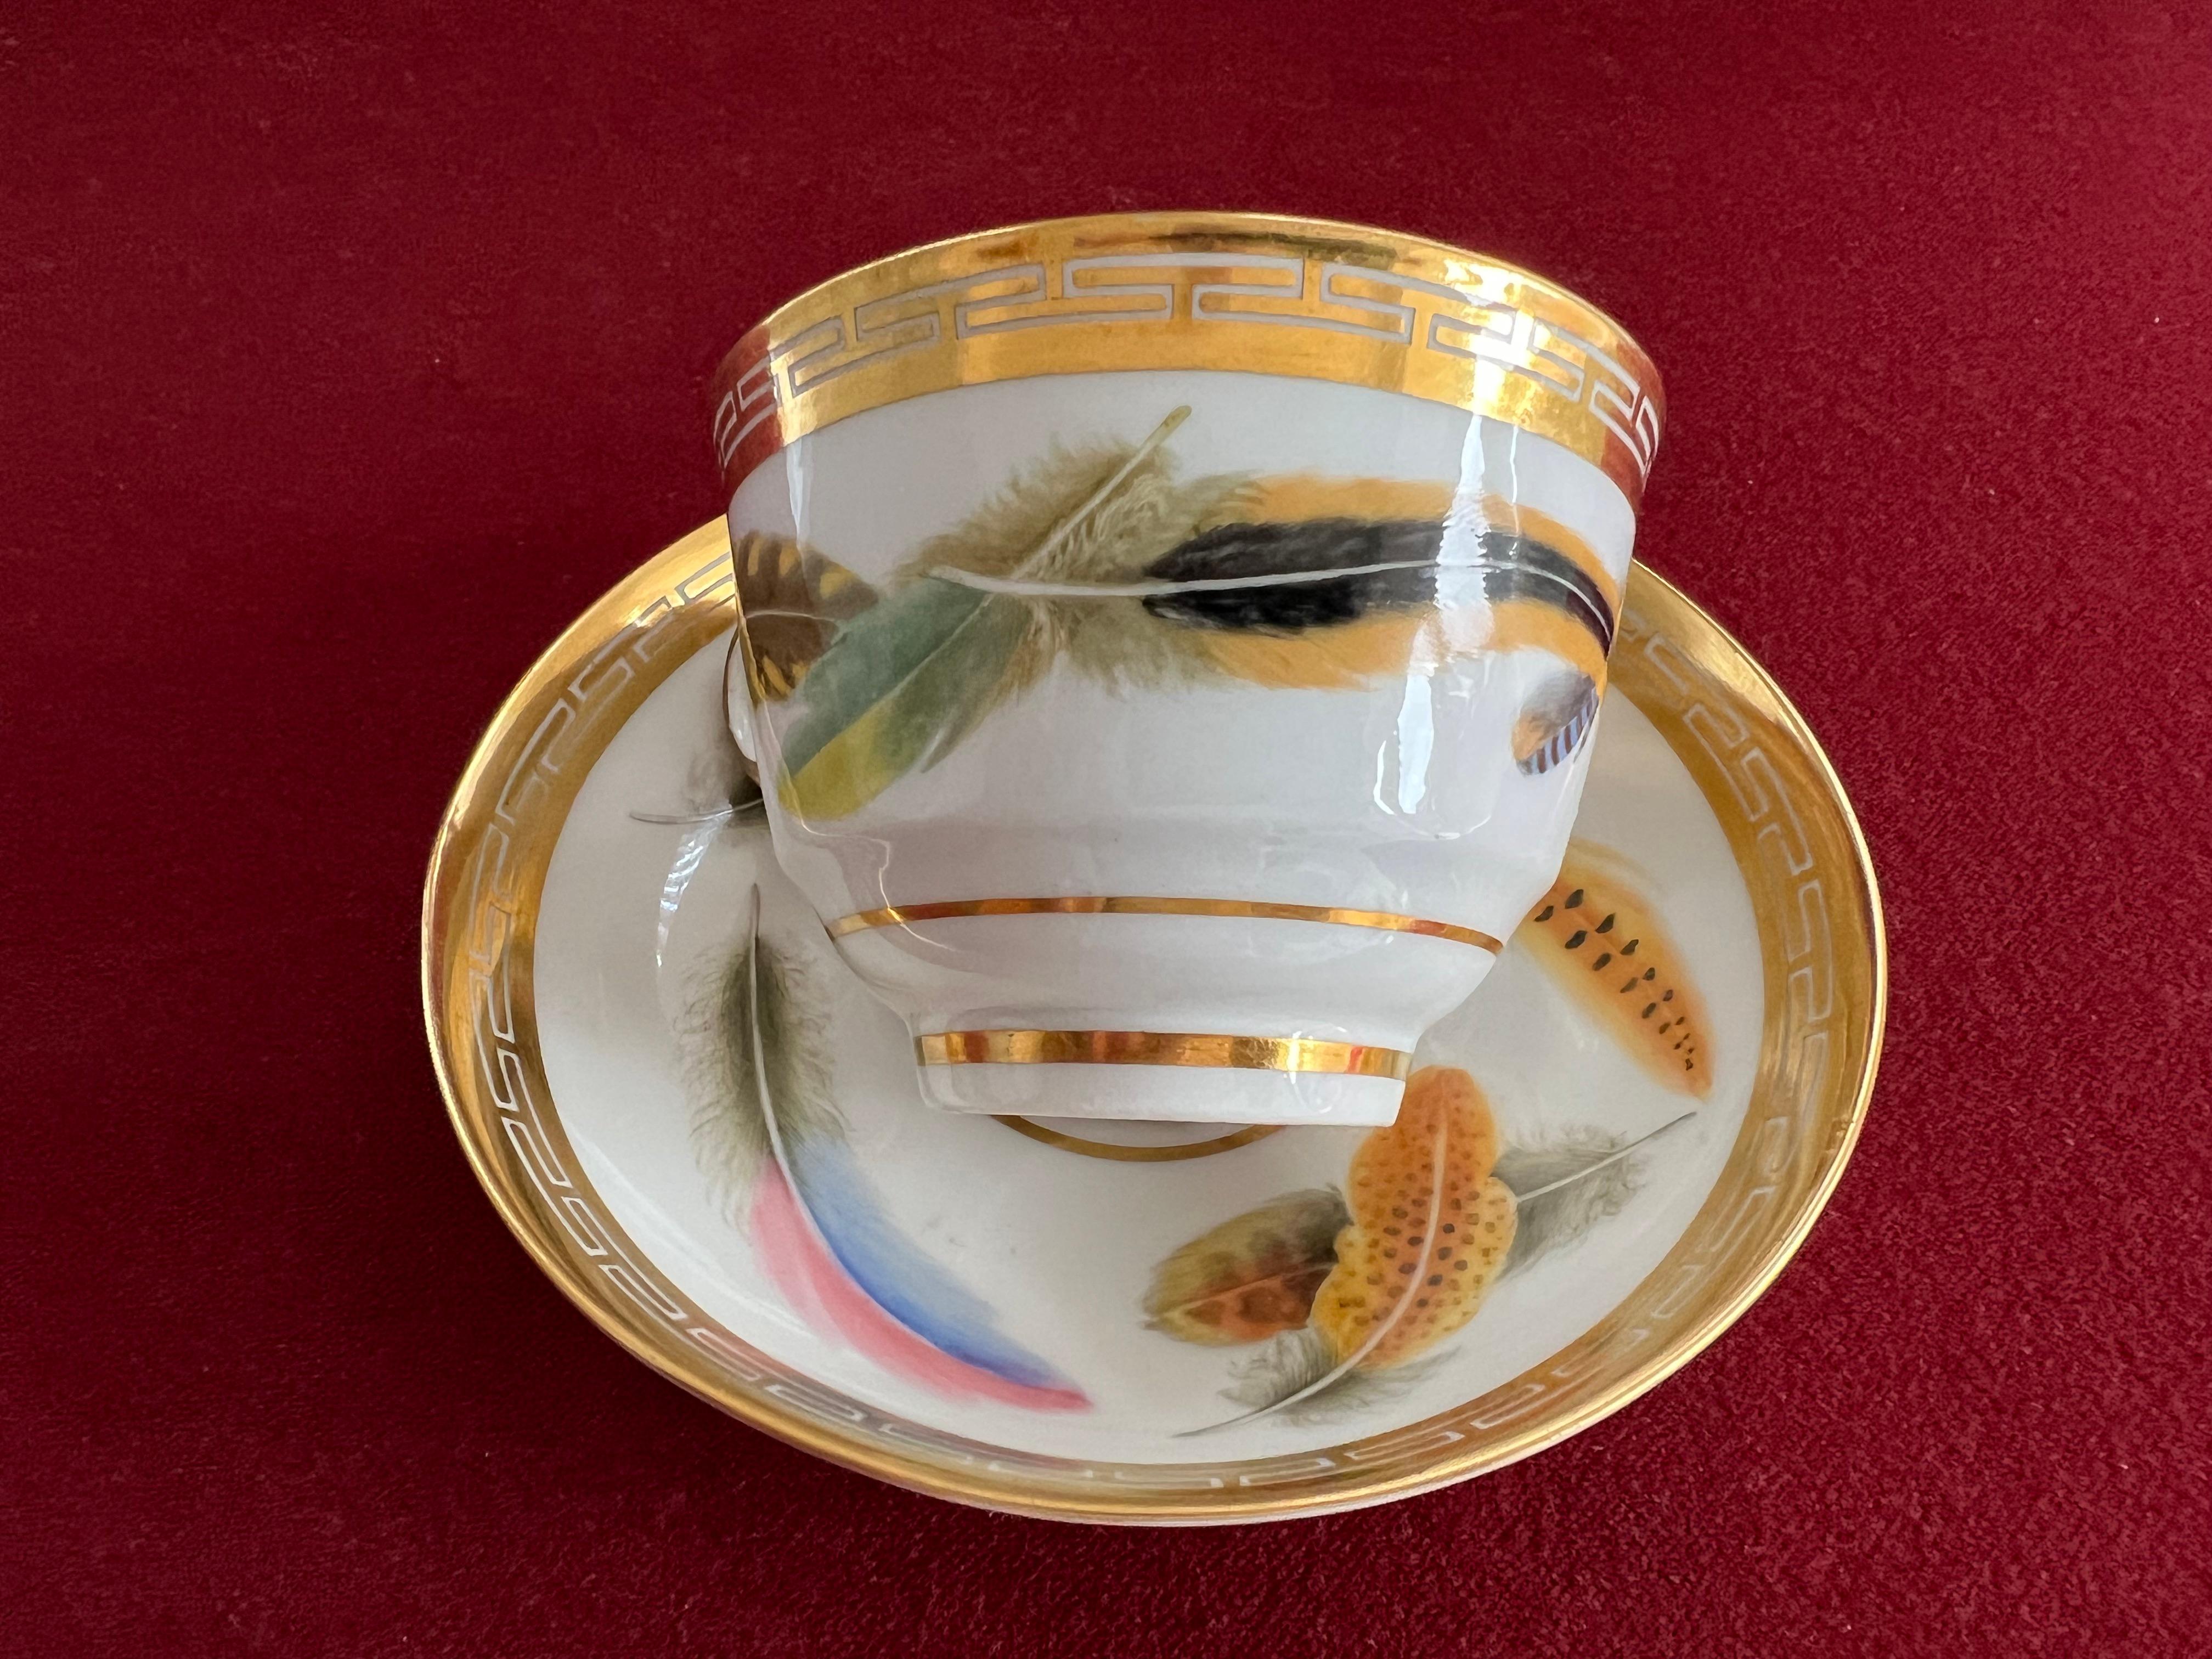 A fine Flight and Barr Worcester feather-painted teacup and saucer, circa 1800. Finely painted with a selection of colourful feathers scattered on the white ground by William Doe, within gold keyfret borders, the ring handle also edged in gold.